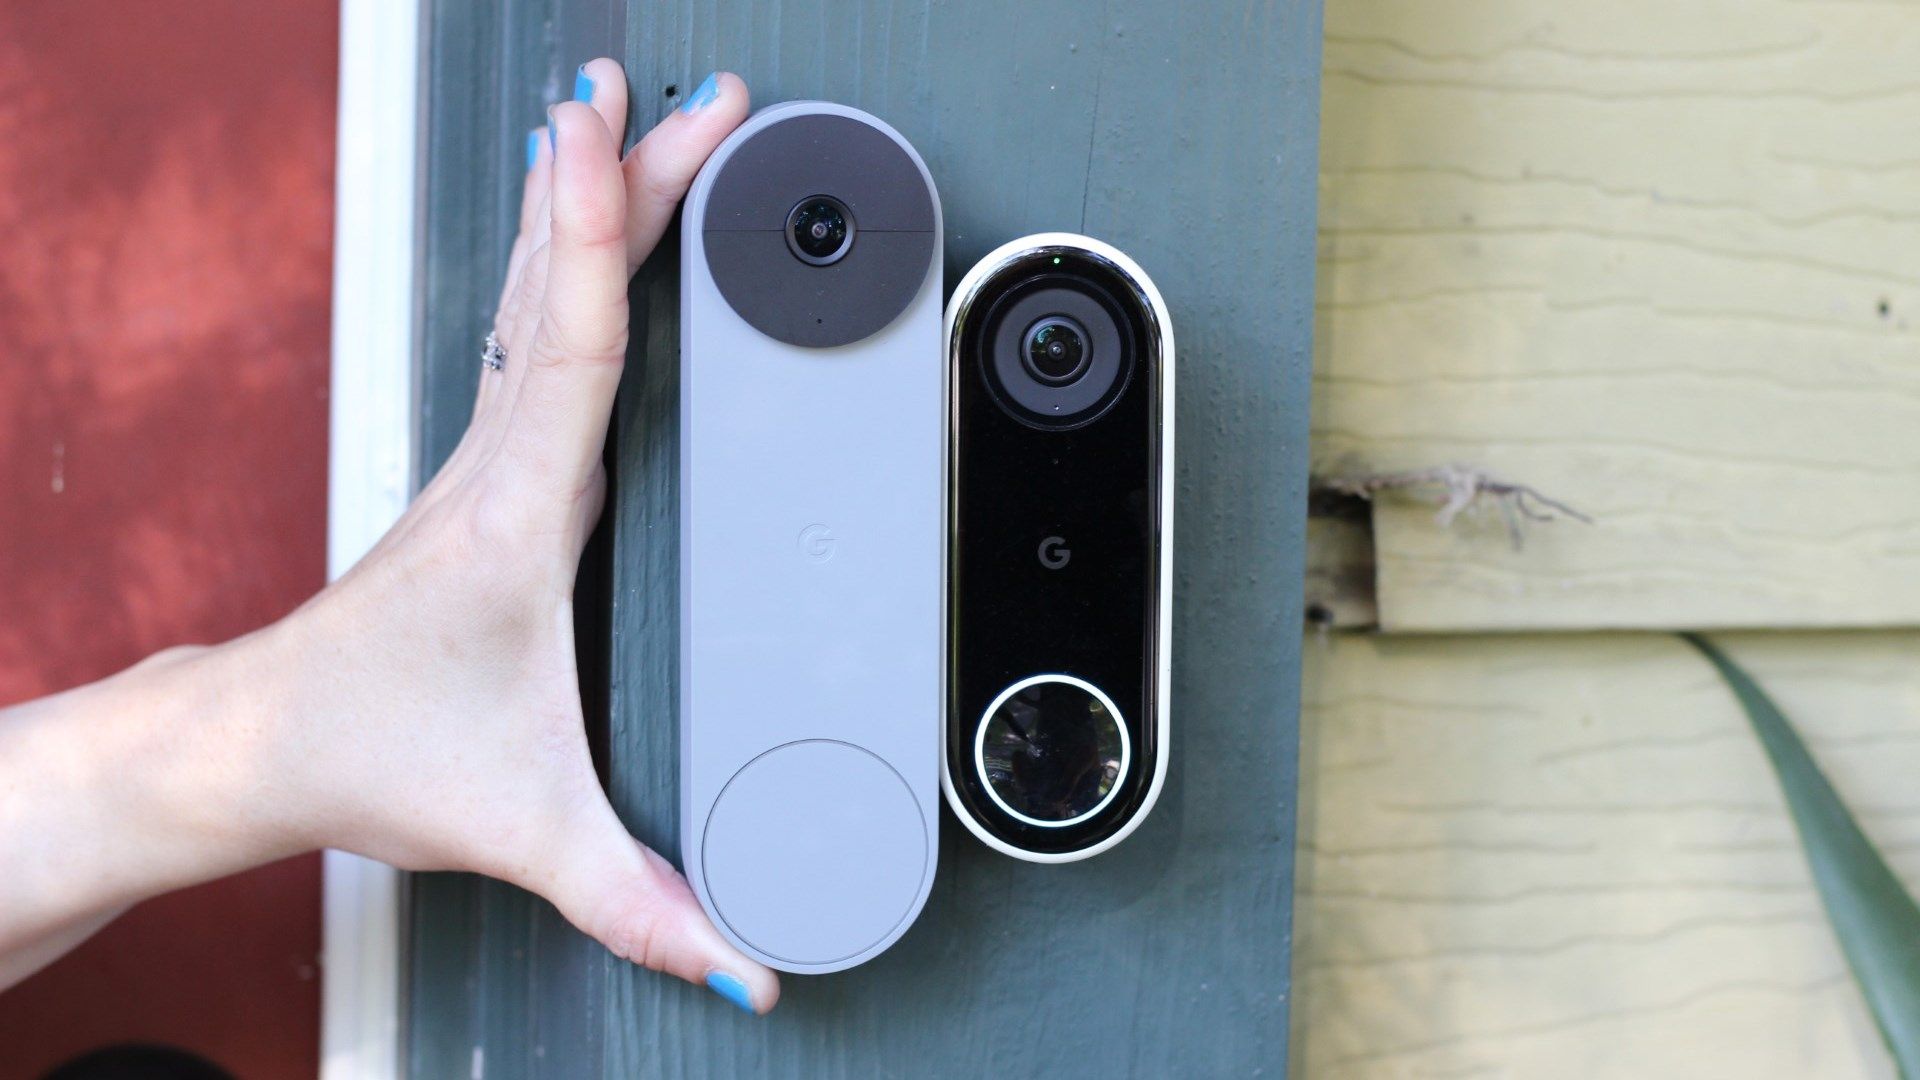 The Nest Doorbell (battery) compared to the (wired) model